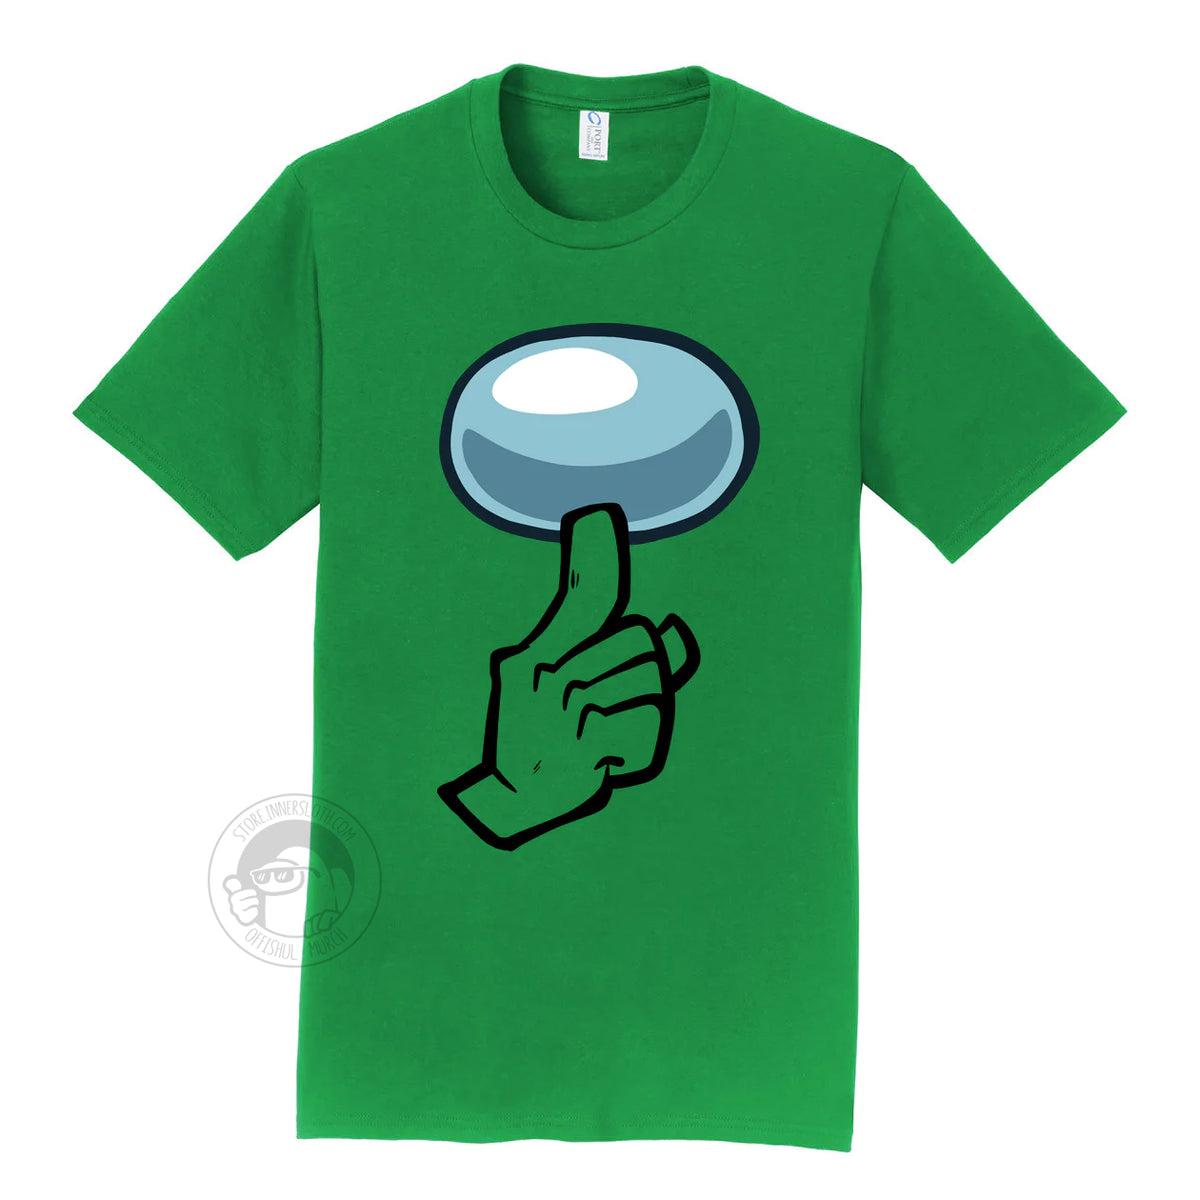 A product photograph of the Among Us: Shhhirt t-shirt in green. The art on the shirt shows the crewmate visor and a hand with one finger pointing up in a “shh”ing pose. 